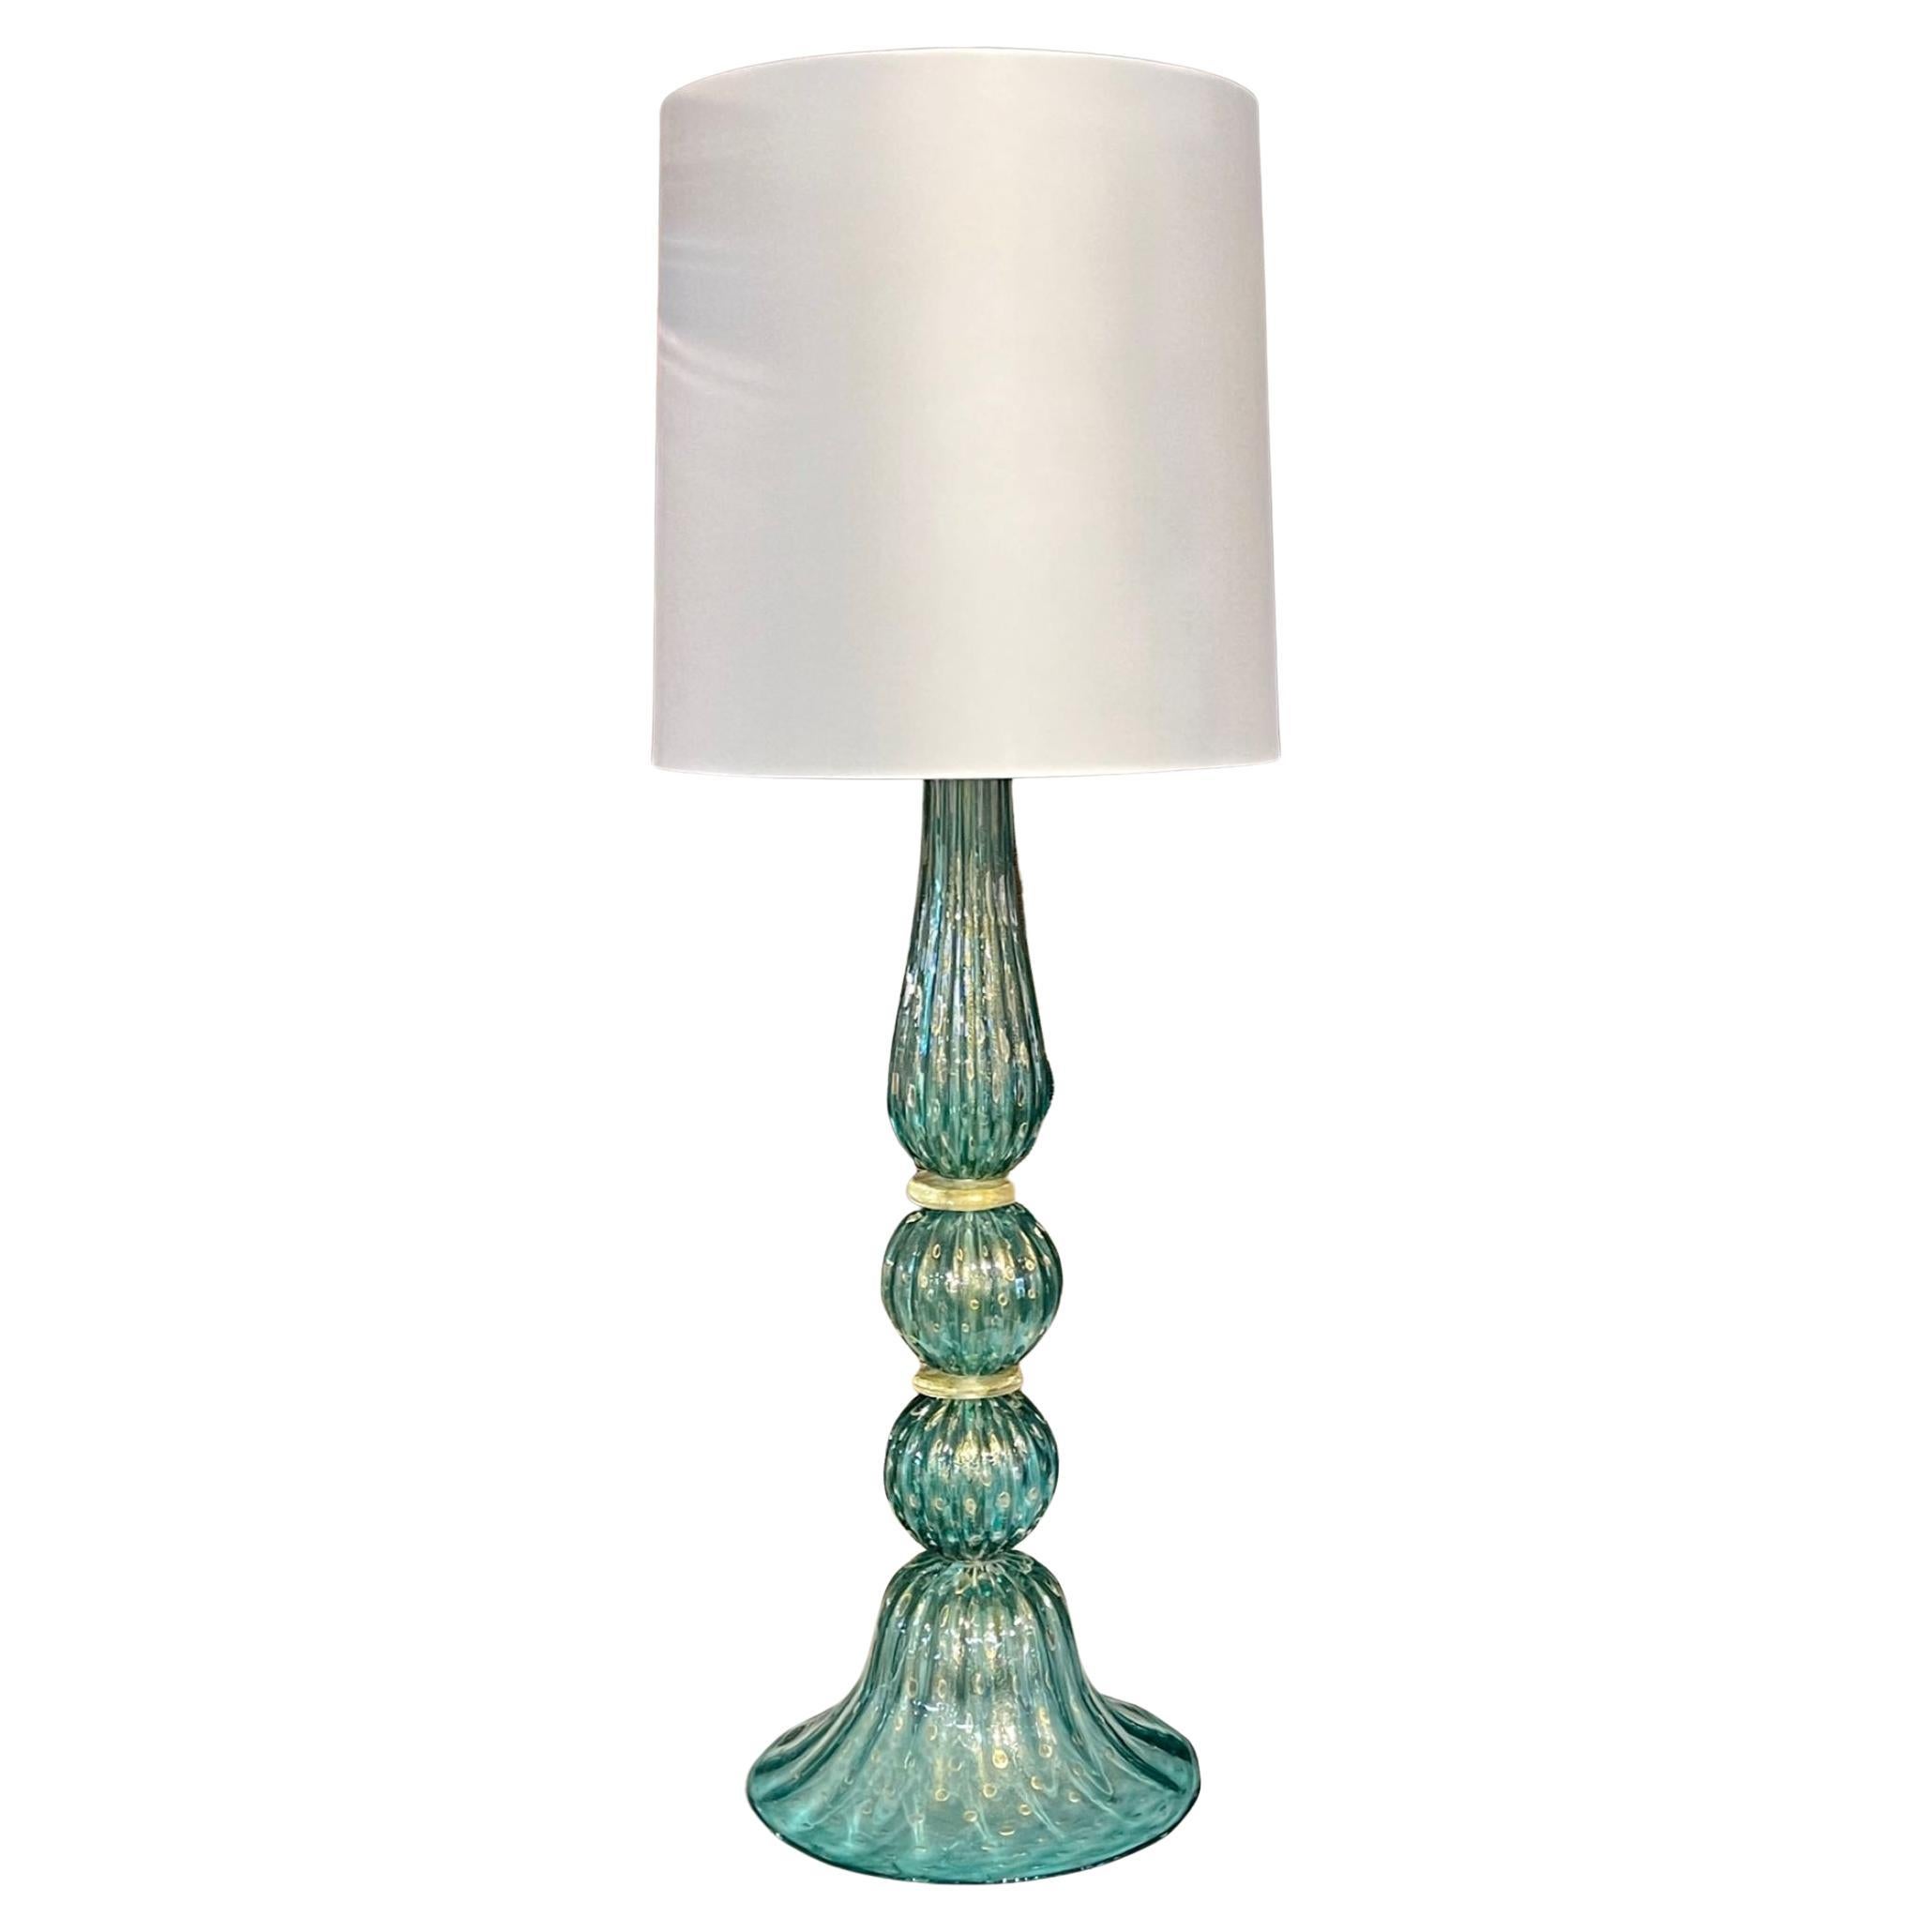 Vintage Green and Gold Murano Glass Lamp